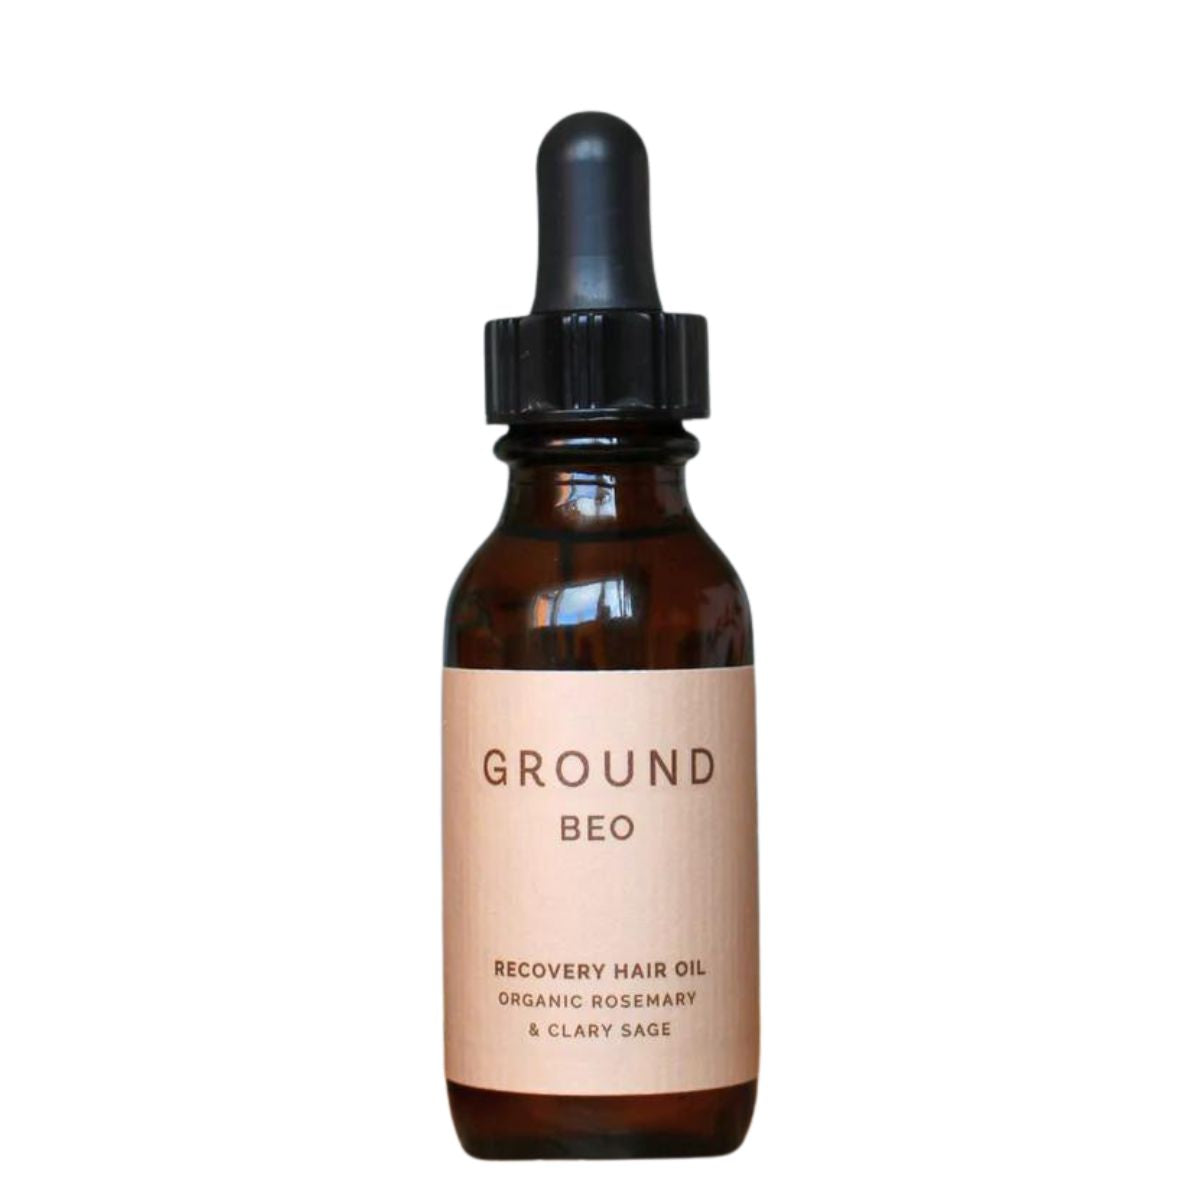 Ground Beo Recovery Hair Oil Rosemary & Clary Sage